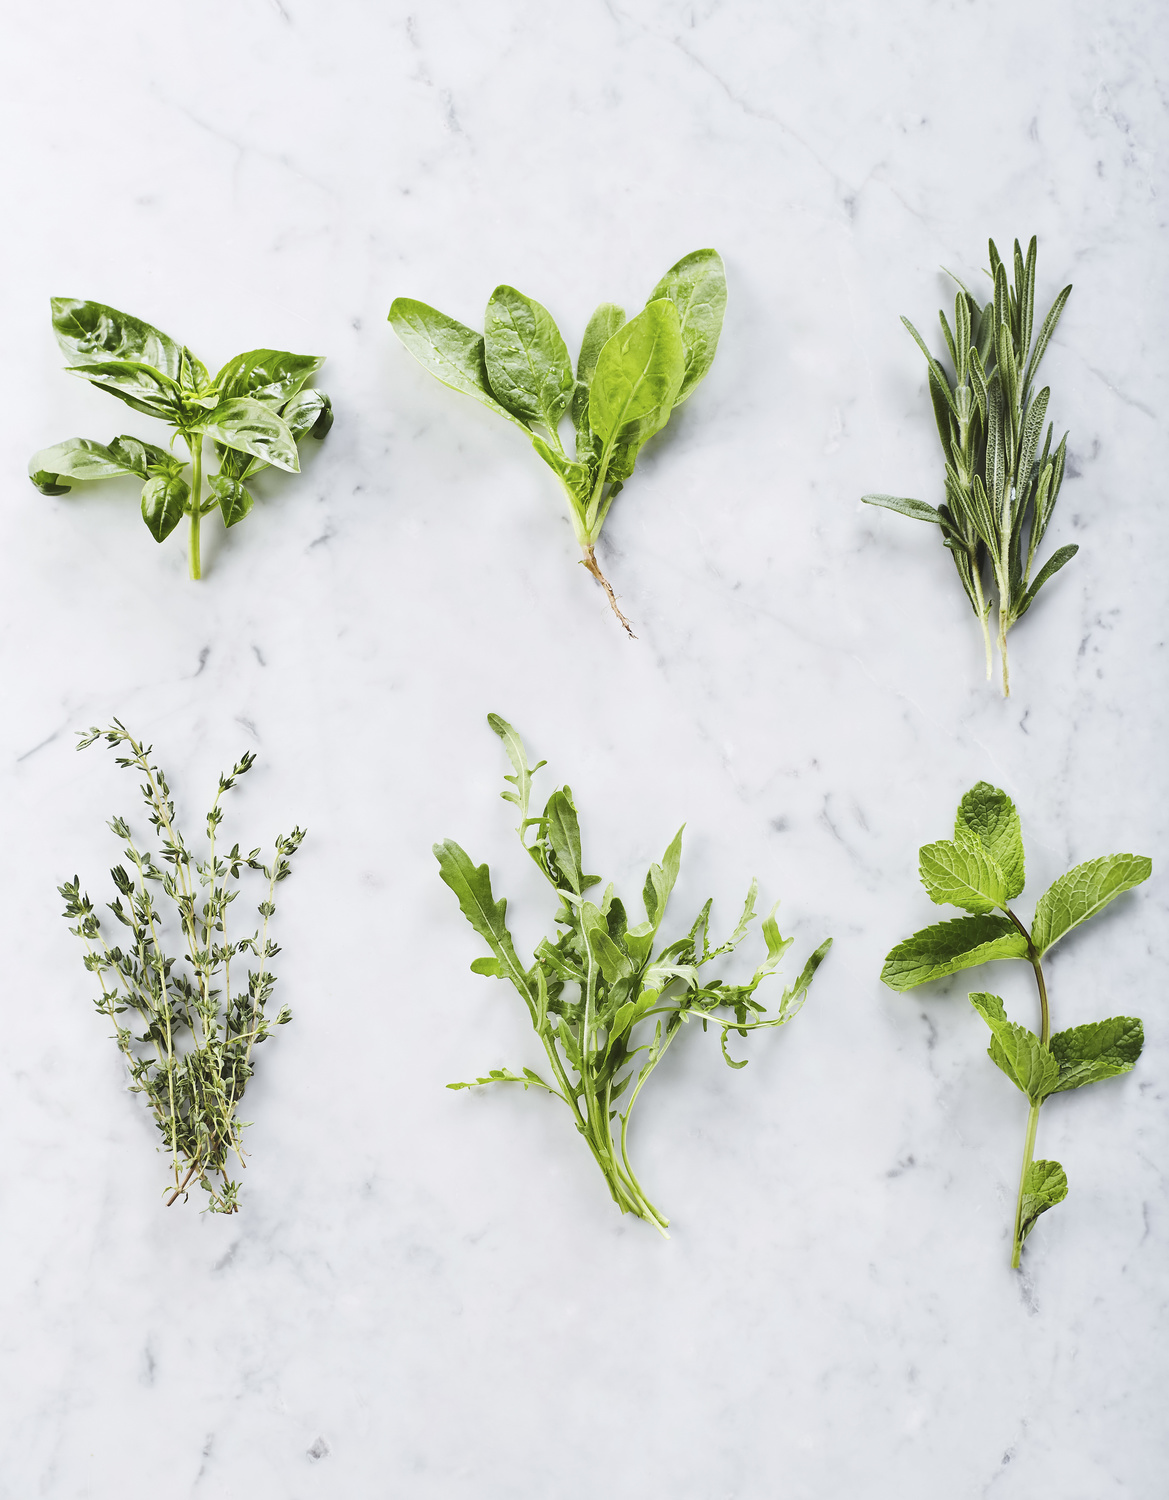 Six bunches of herbs on marble countertop: basil, spinach, rosemary, mint, thyme, rucola. From above shot